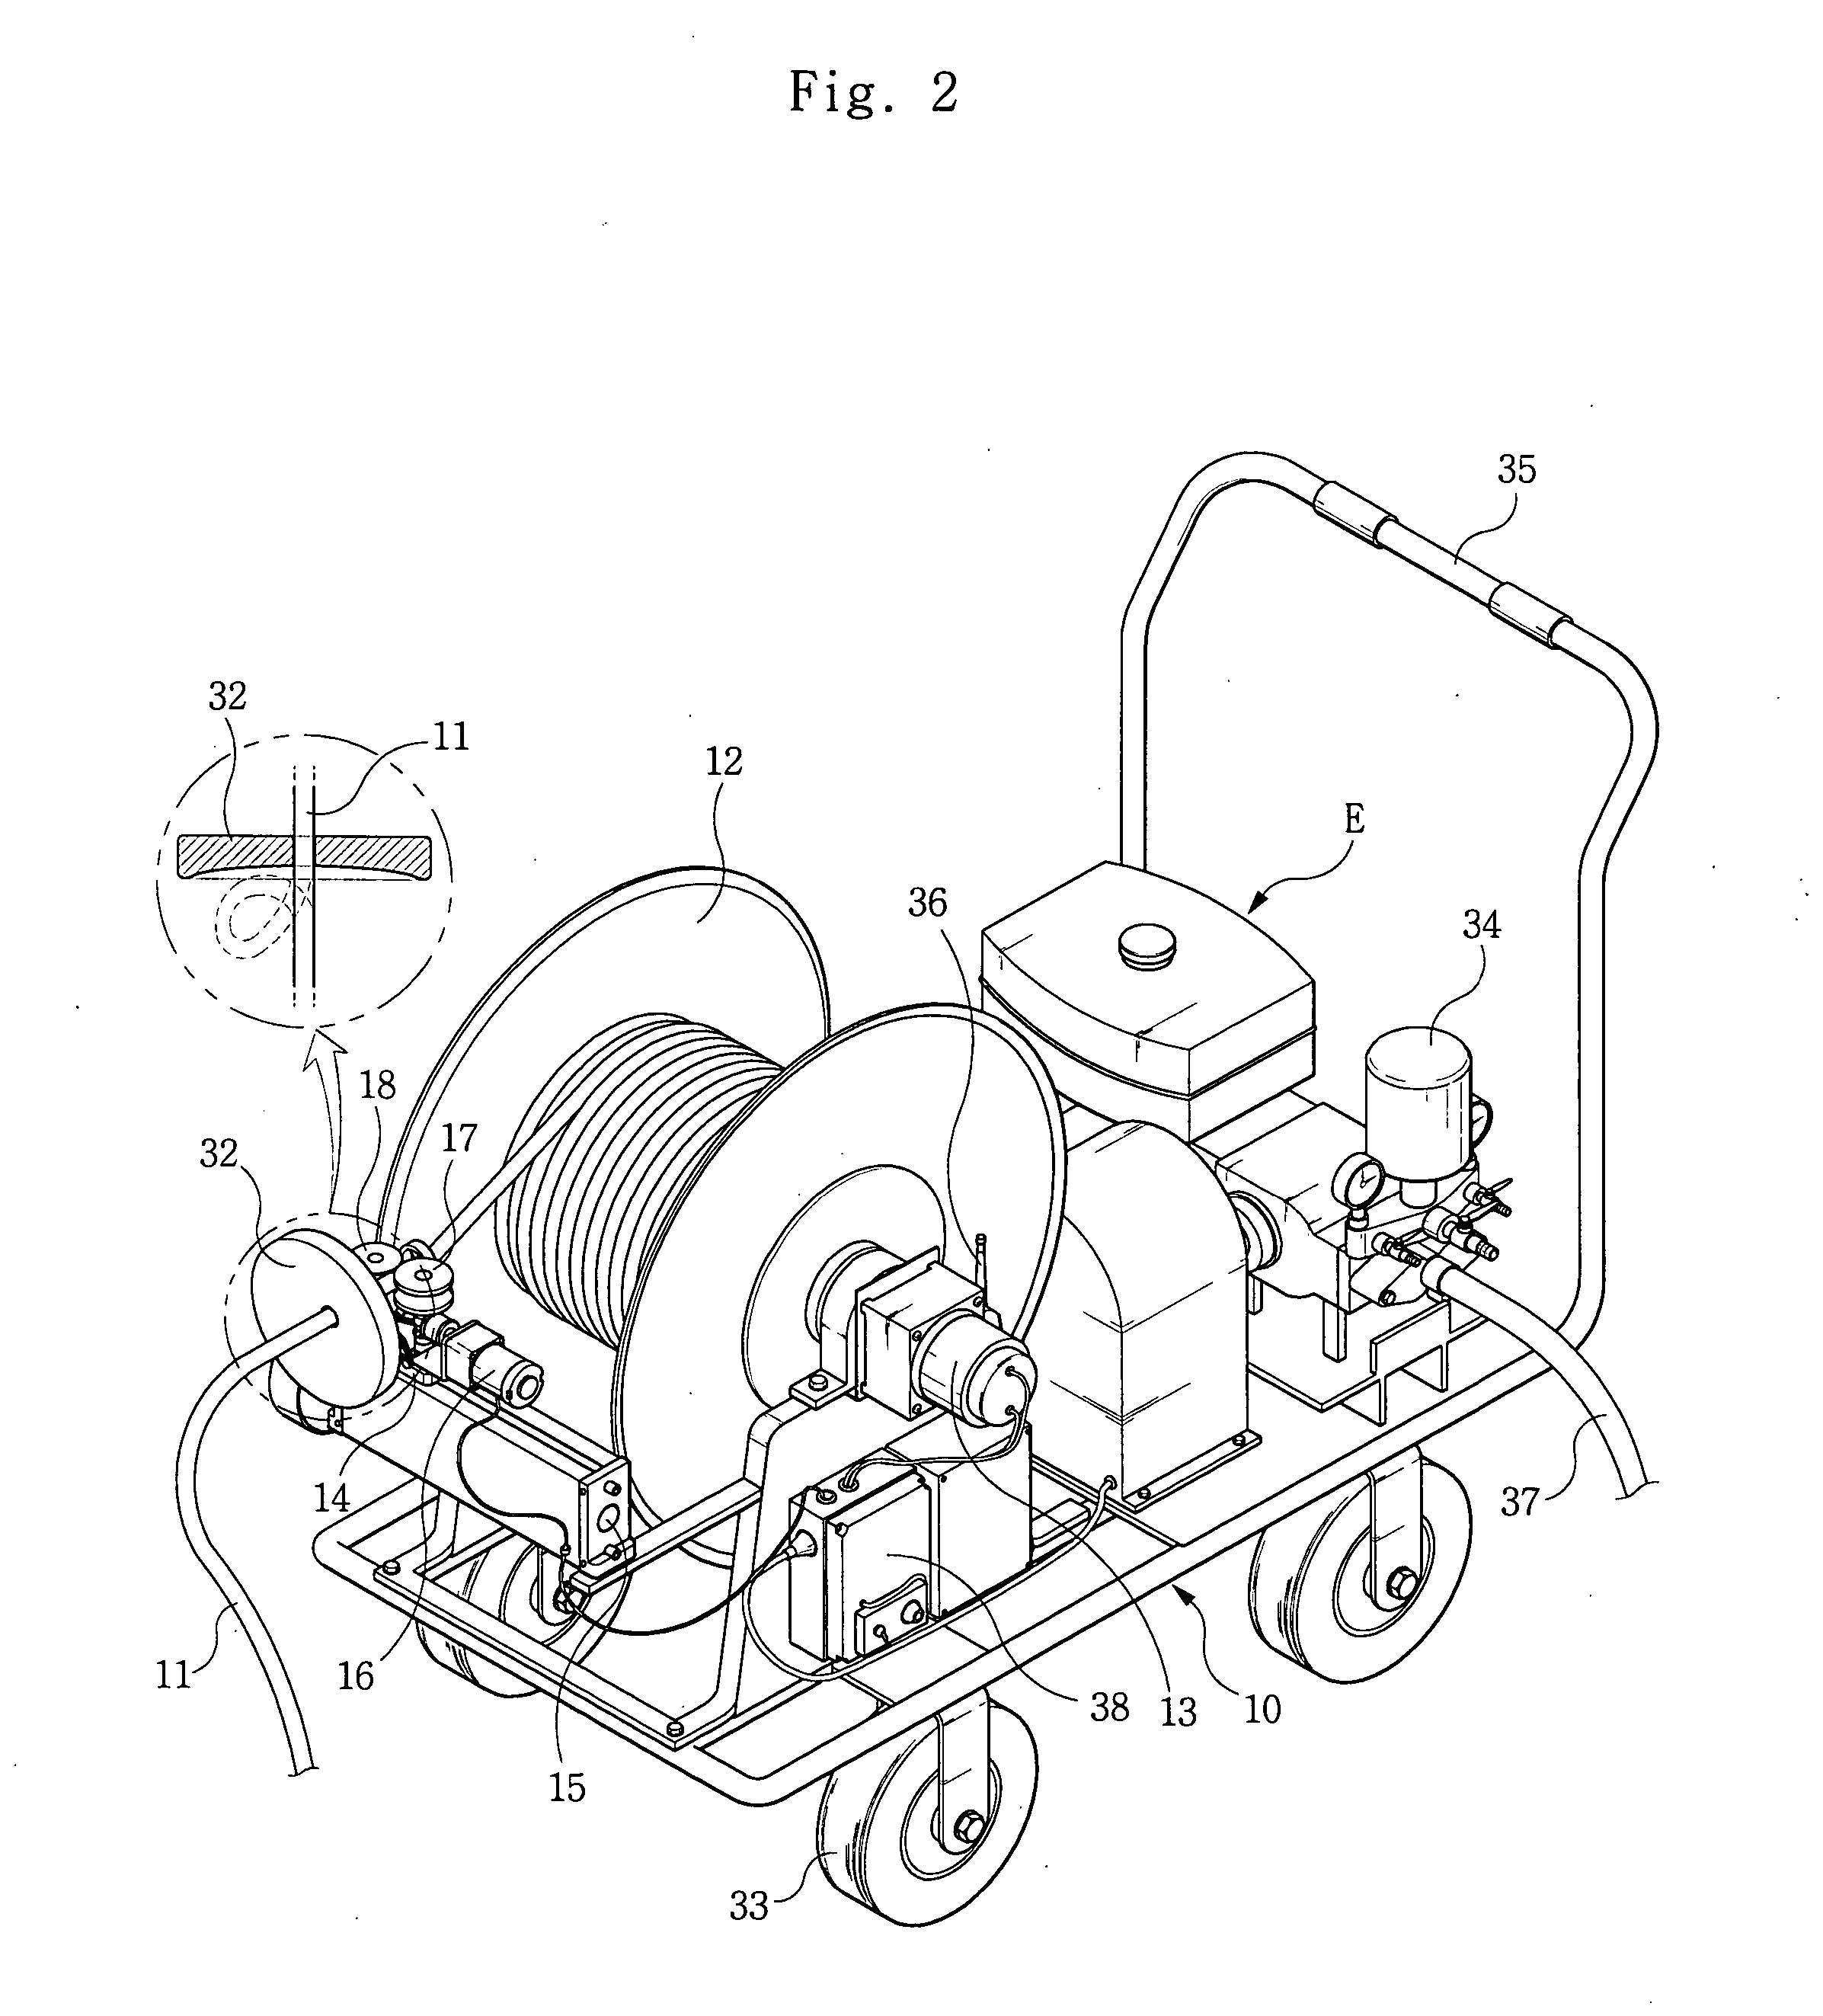 Labor reduction type agricultural chemical spraying system having automatic hose winding and unwinding apparatus